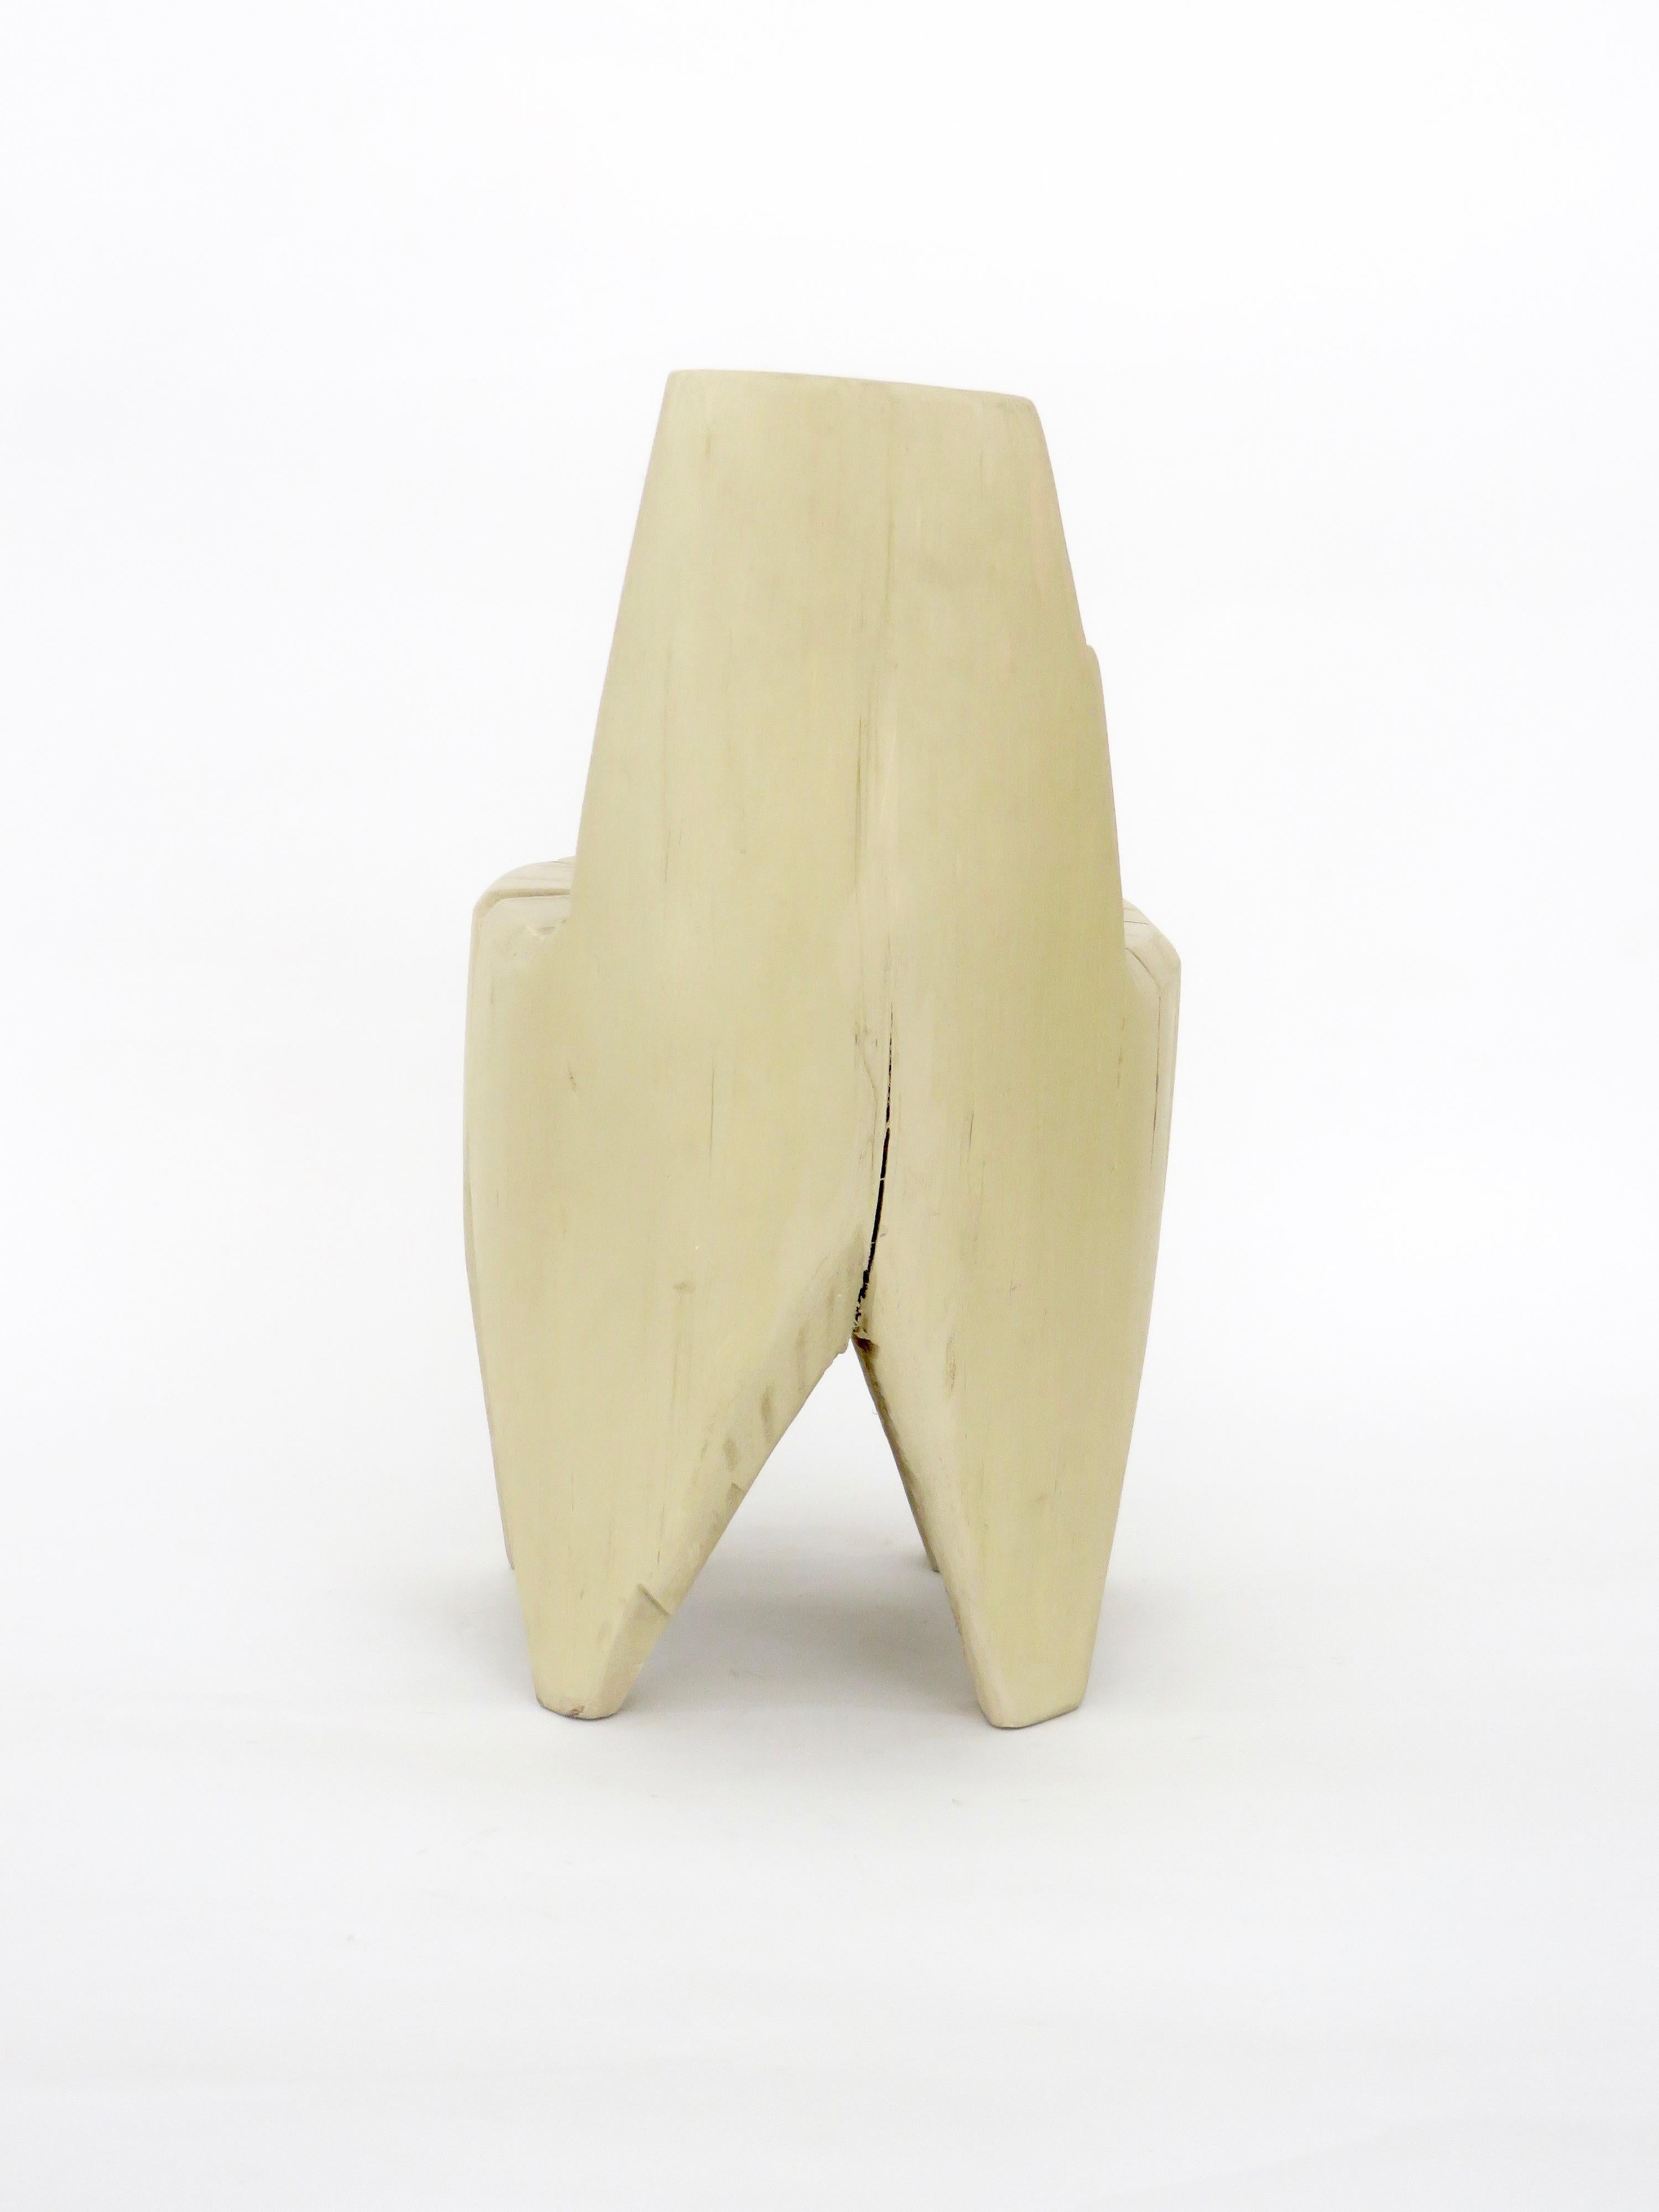 Hand-Painted Hannah Vaughan Contemporary Carved Sculptural Chair, 2019